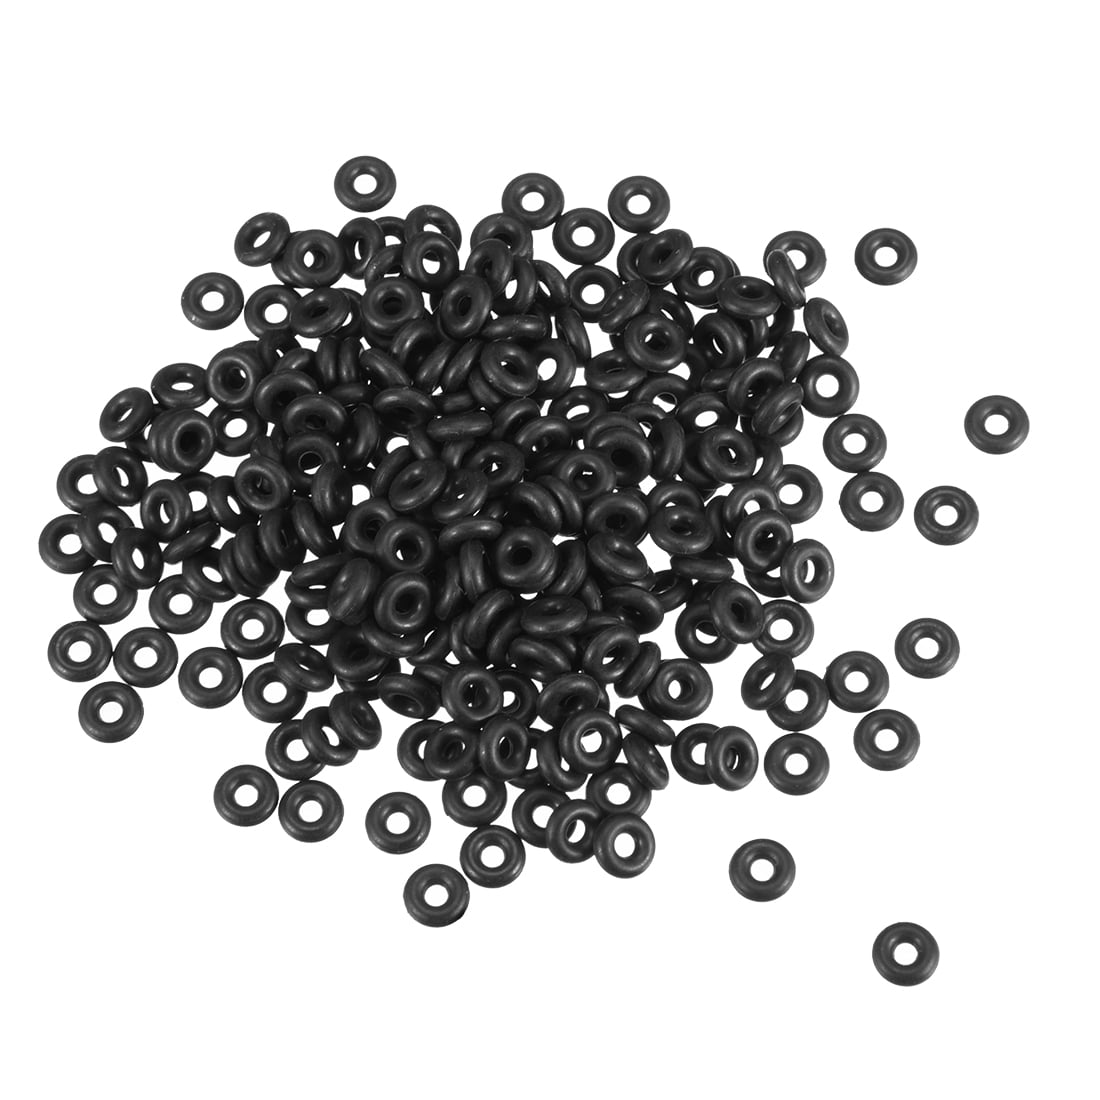 5mm Section 113mm Bore NITRILE 70 Rubber O-Rings 